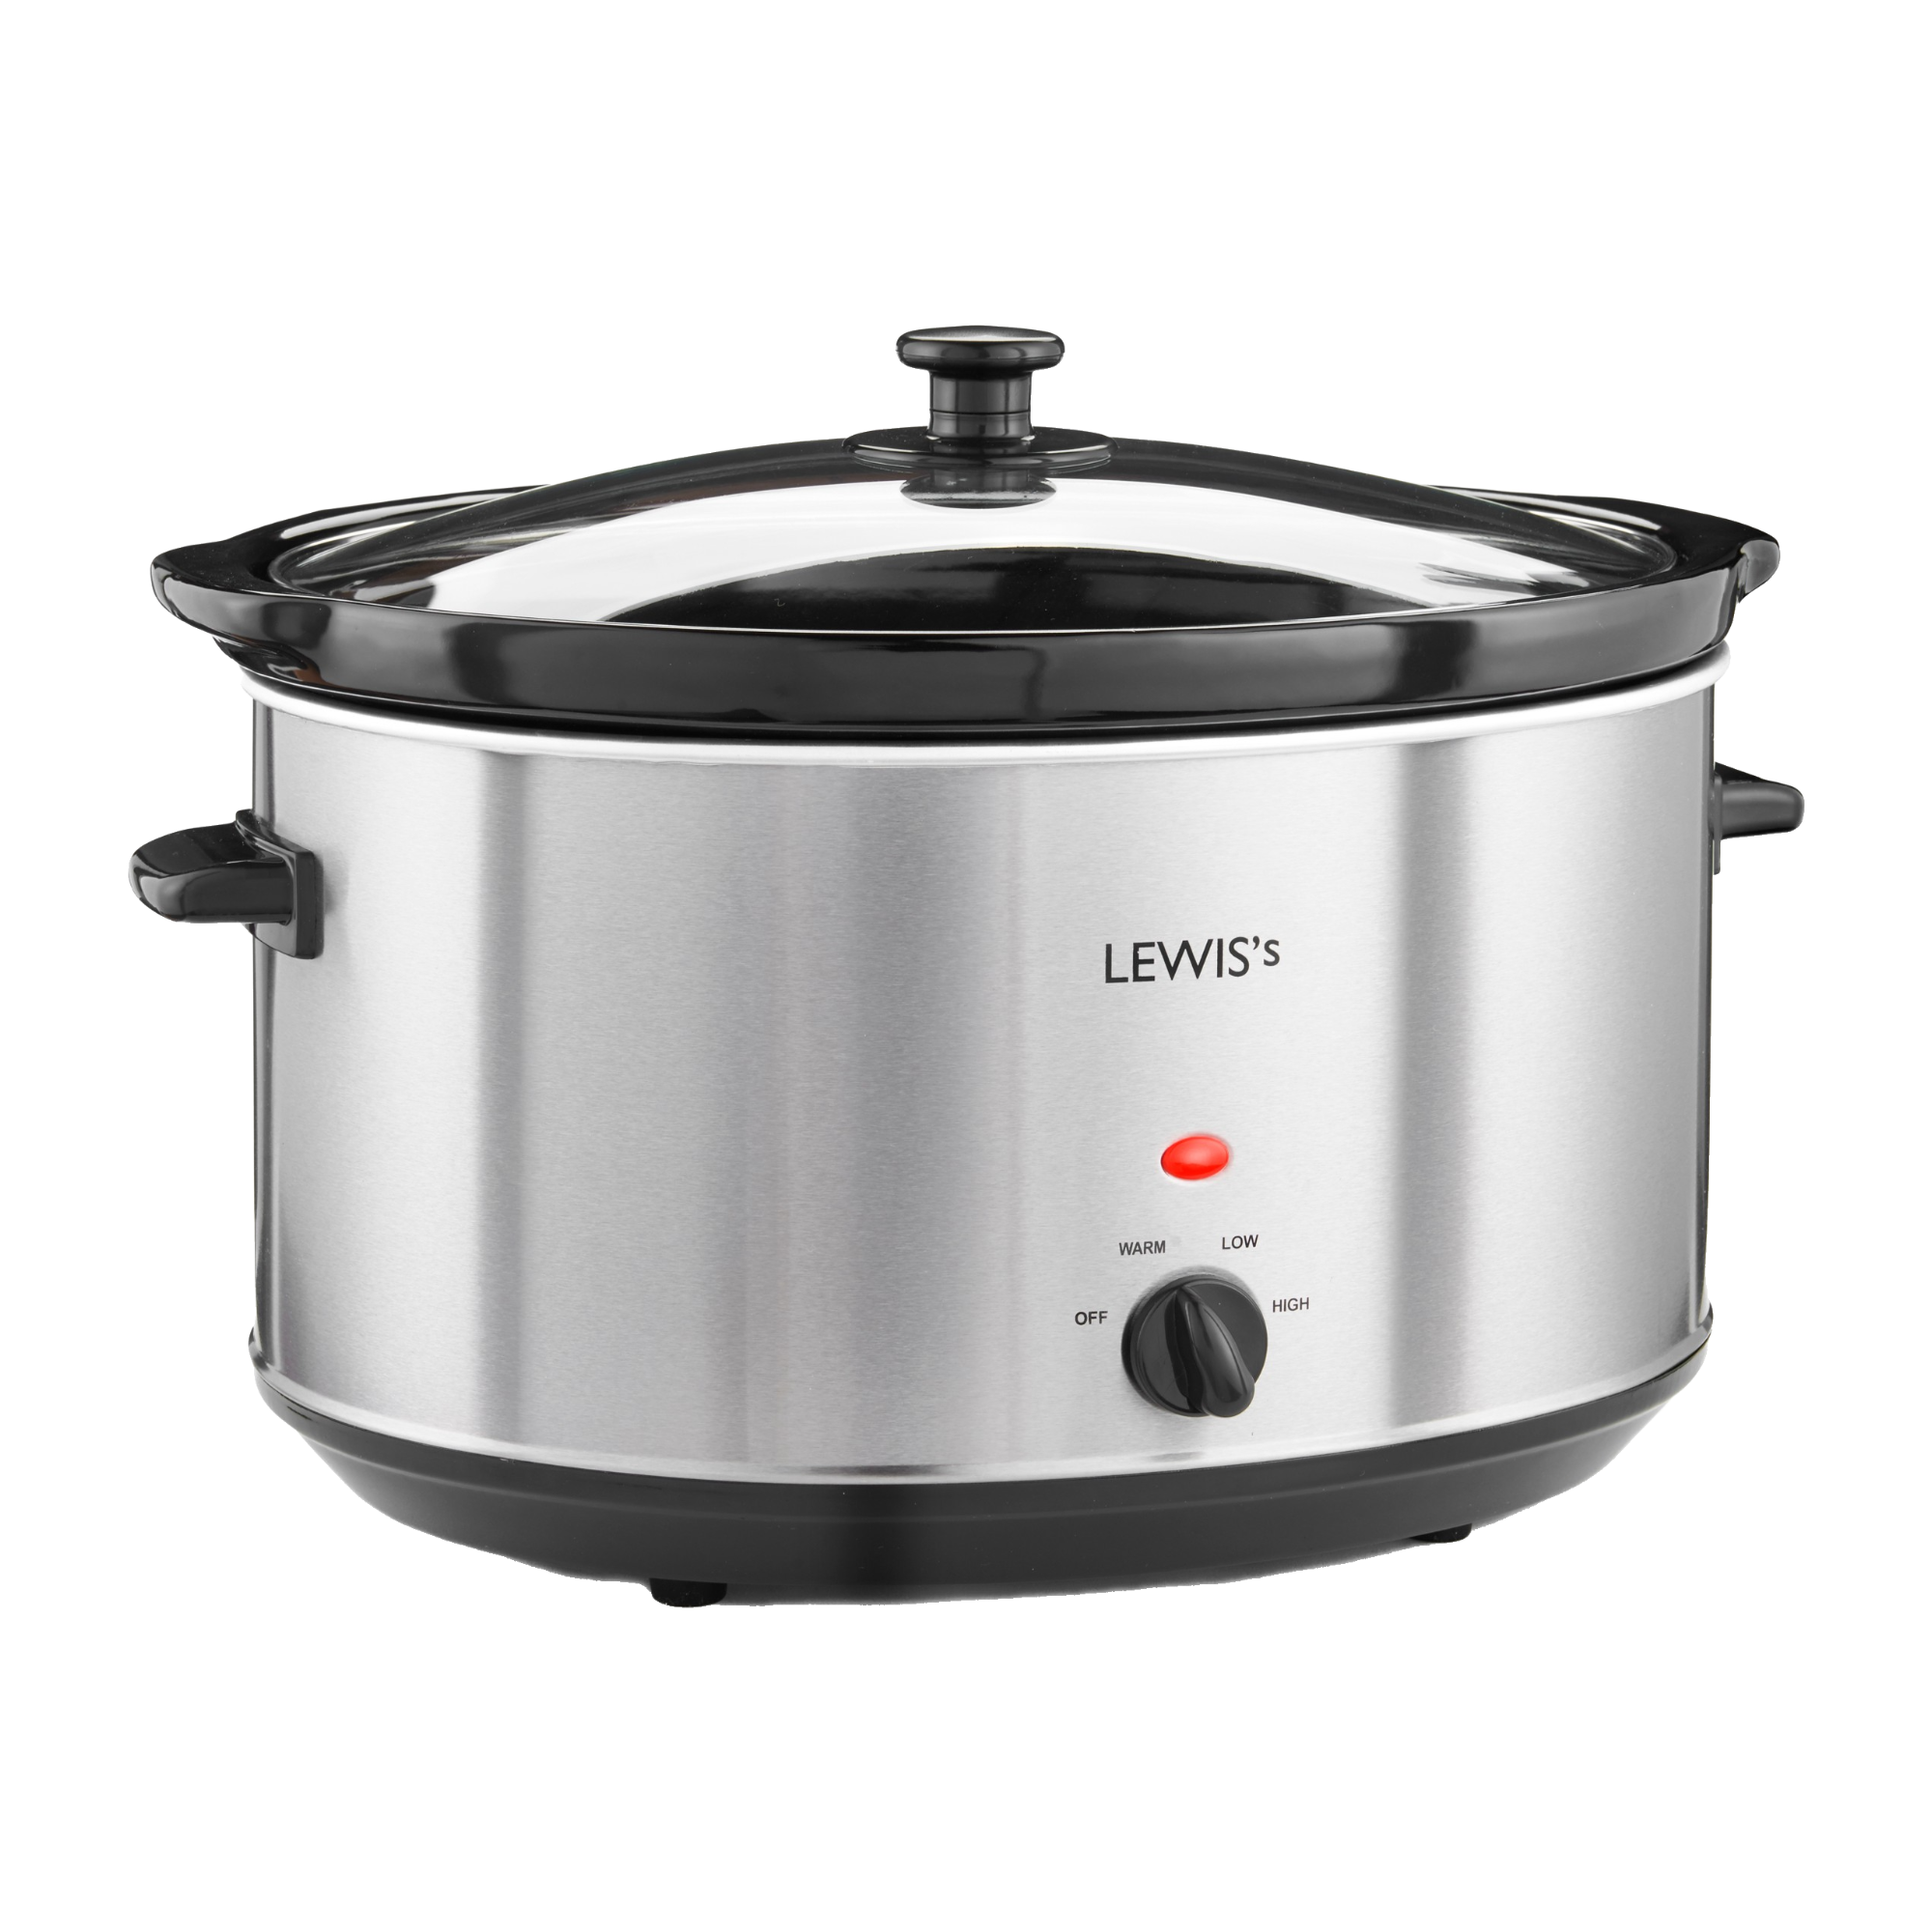 Lewis’s 8L Stainless Steel Slow Cooker  | TJ Hughes Silver